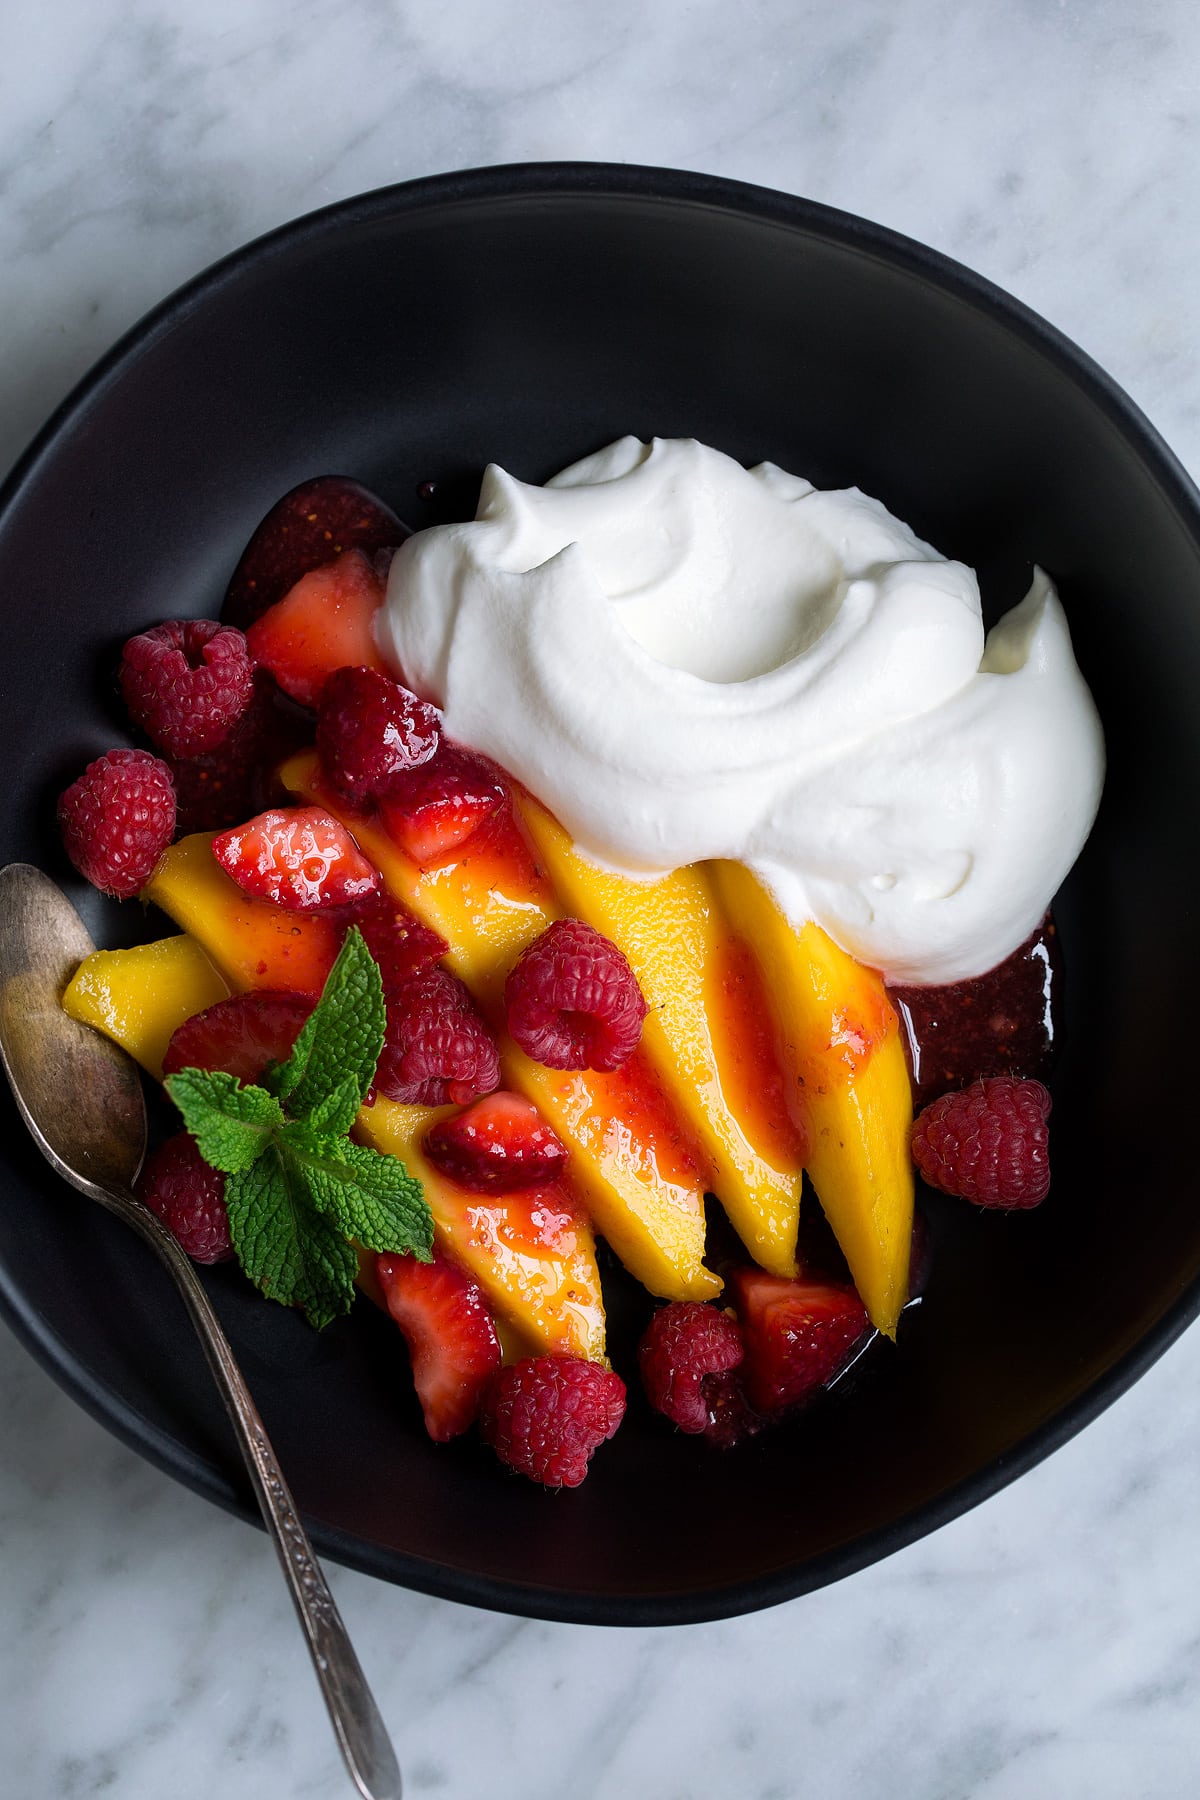 Whipped Cream served with fresh mangoes, strawberries and raspberries in a black bowl.